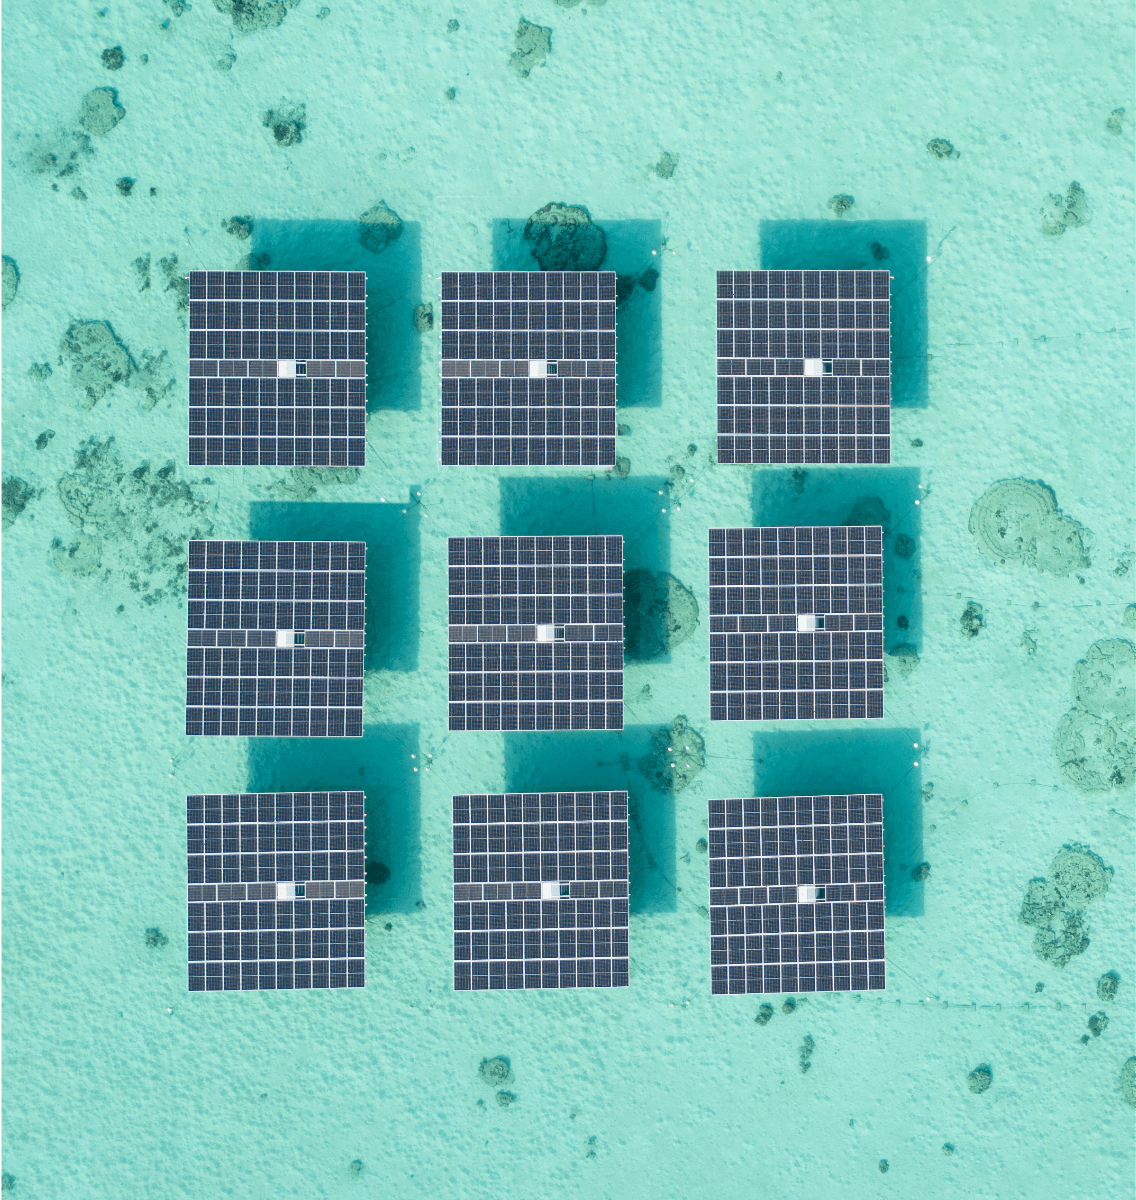 Bawah Reserve, floating solar panel farm, 6 panels in the lagoon.